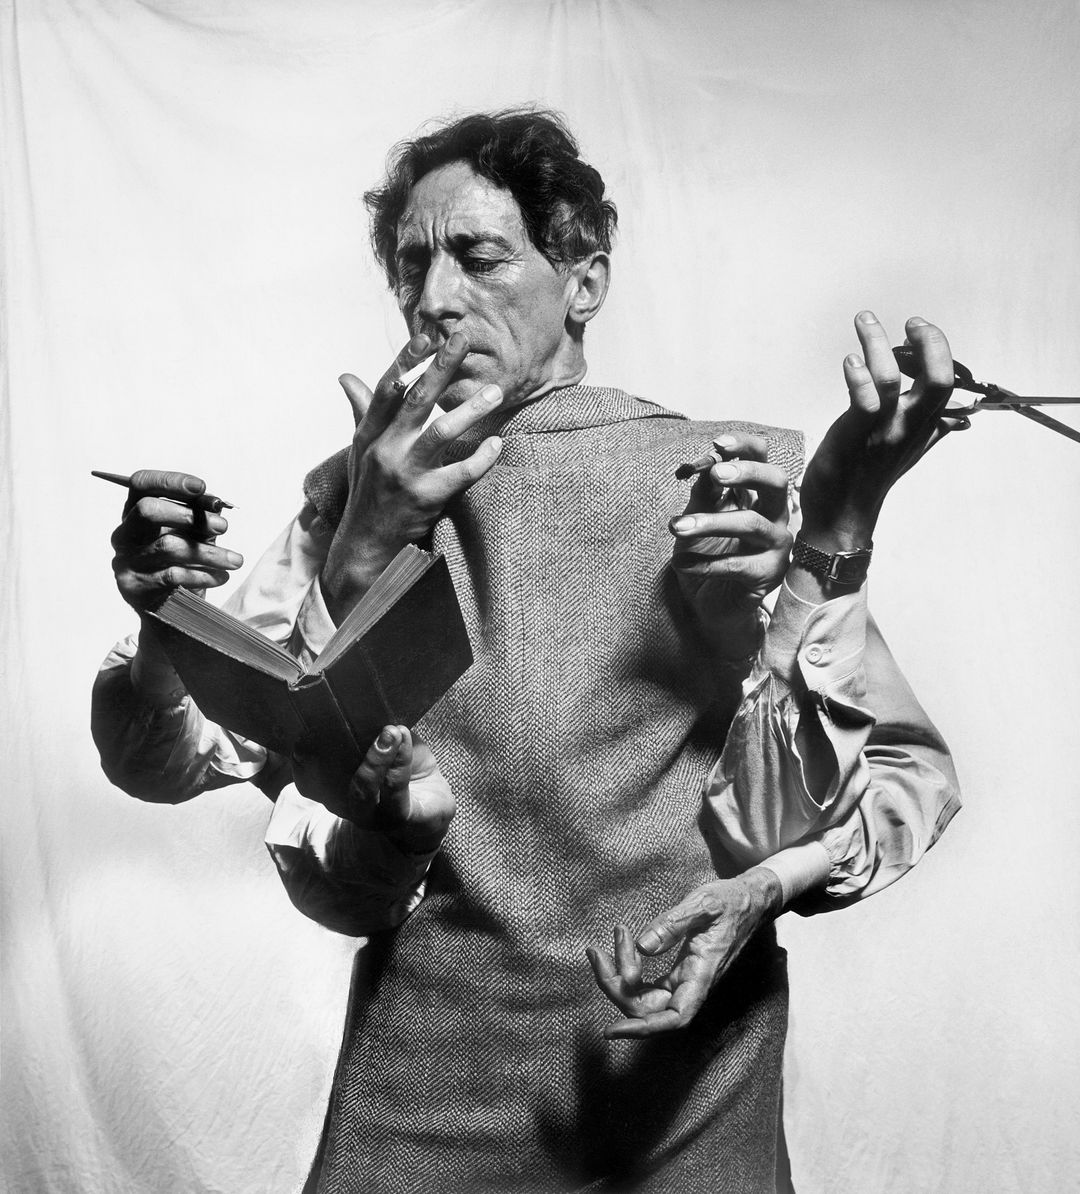 “Jean Cocteau: The Juggler’s Revenge,” on view from Saturday through September 16 @GuggenheimPGC in Venice — guggenheim-venice.it/en/whats-on/ex…